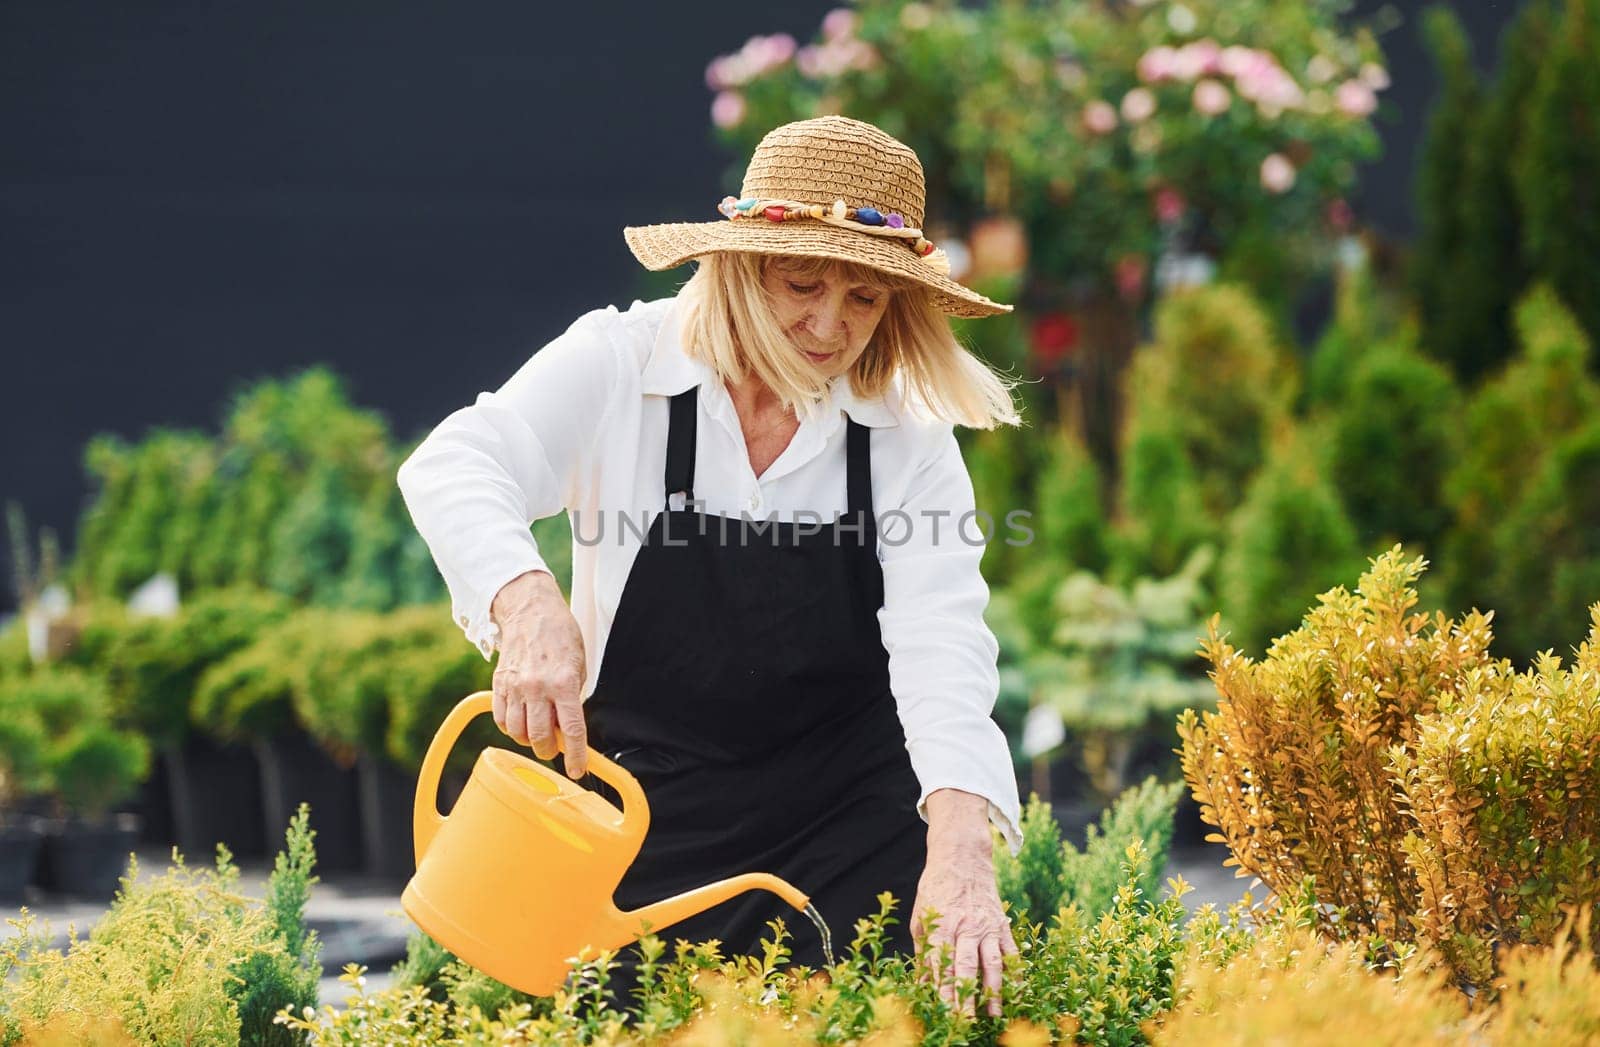 Watering plants. Senior woman is in the garden at daytime by Standret